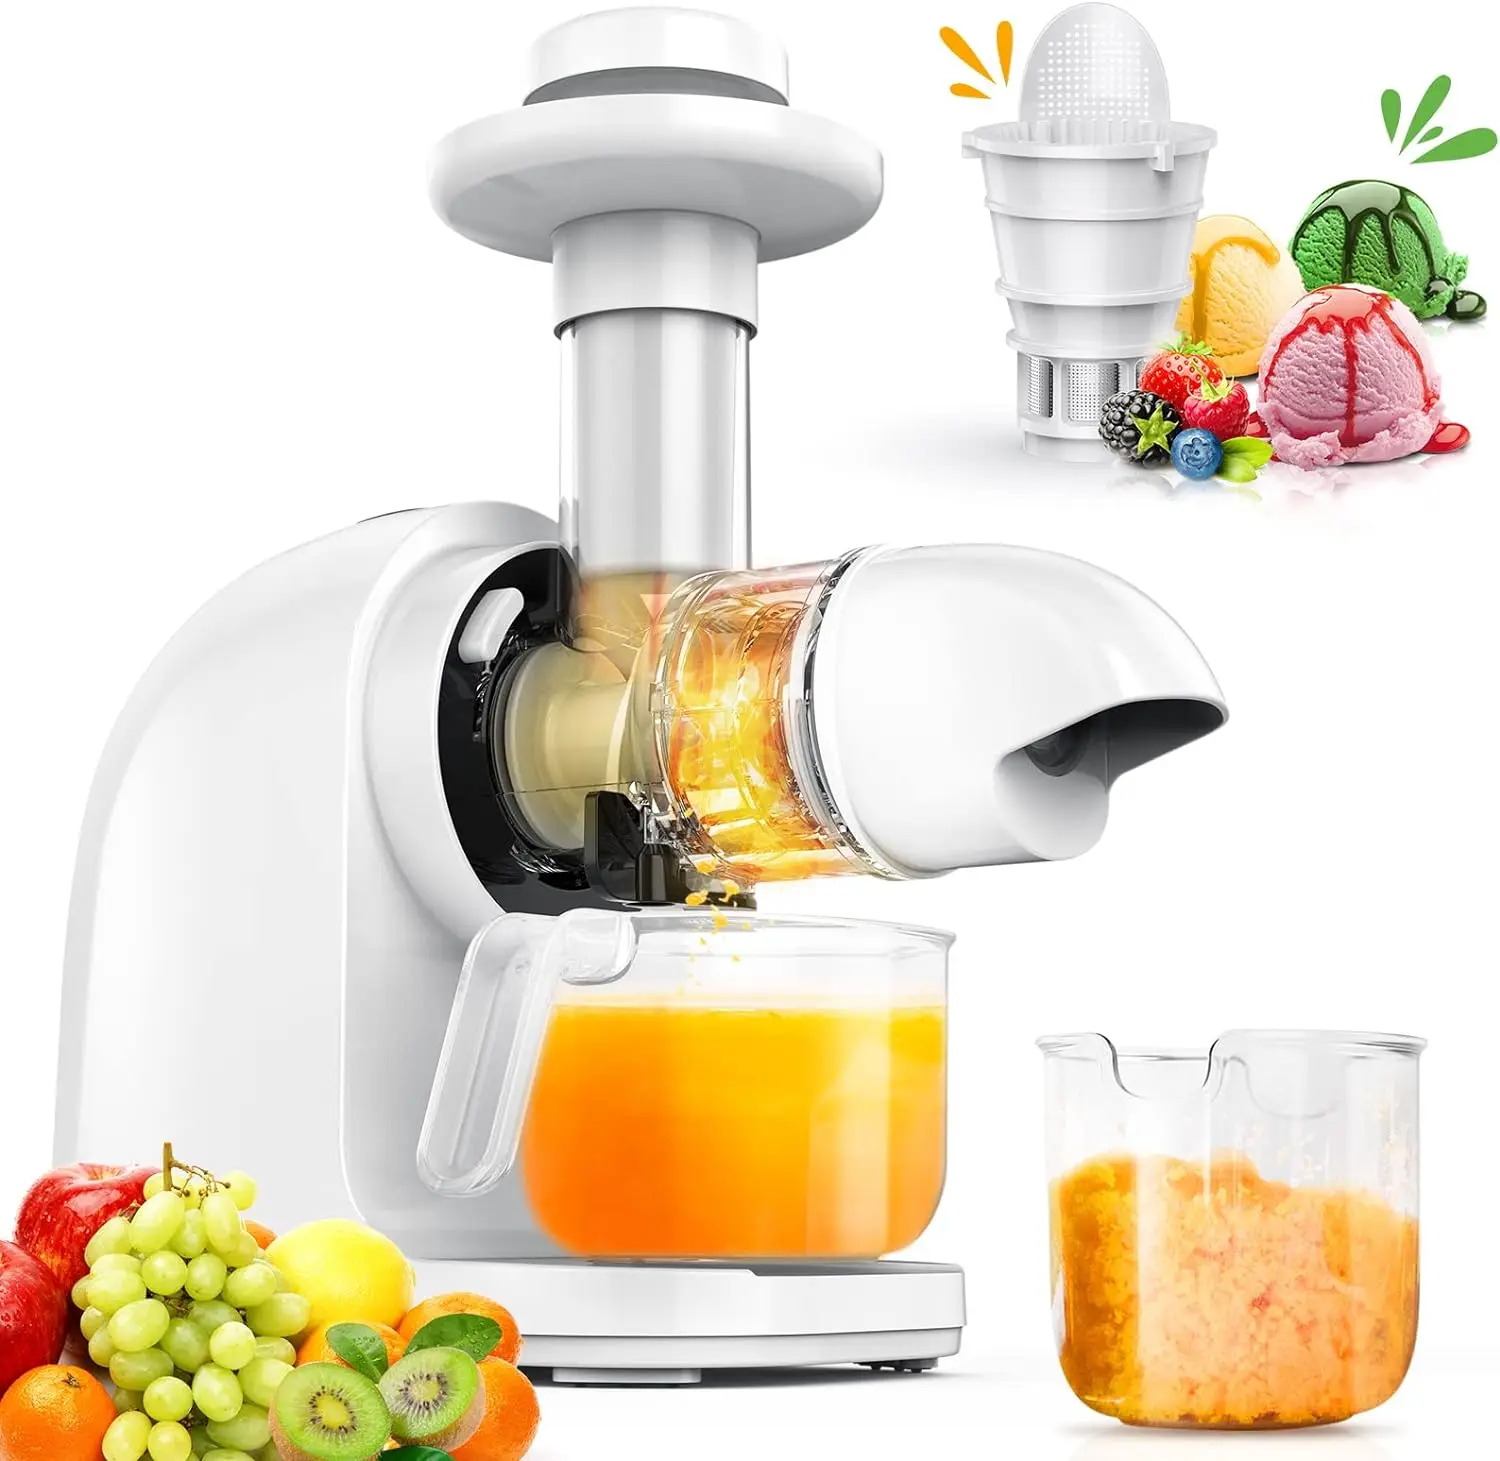 

Press Juicer Machine with Ceramic Auger, Slow Masticating Juicer 95% Juice Yield with Reverse Function, Quiet Motor Extractor, E